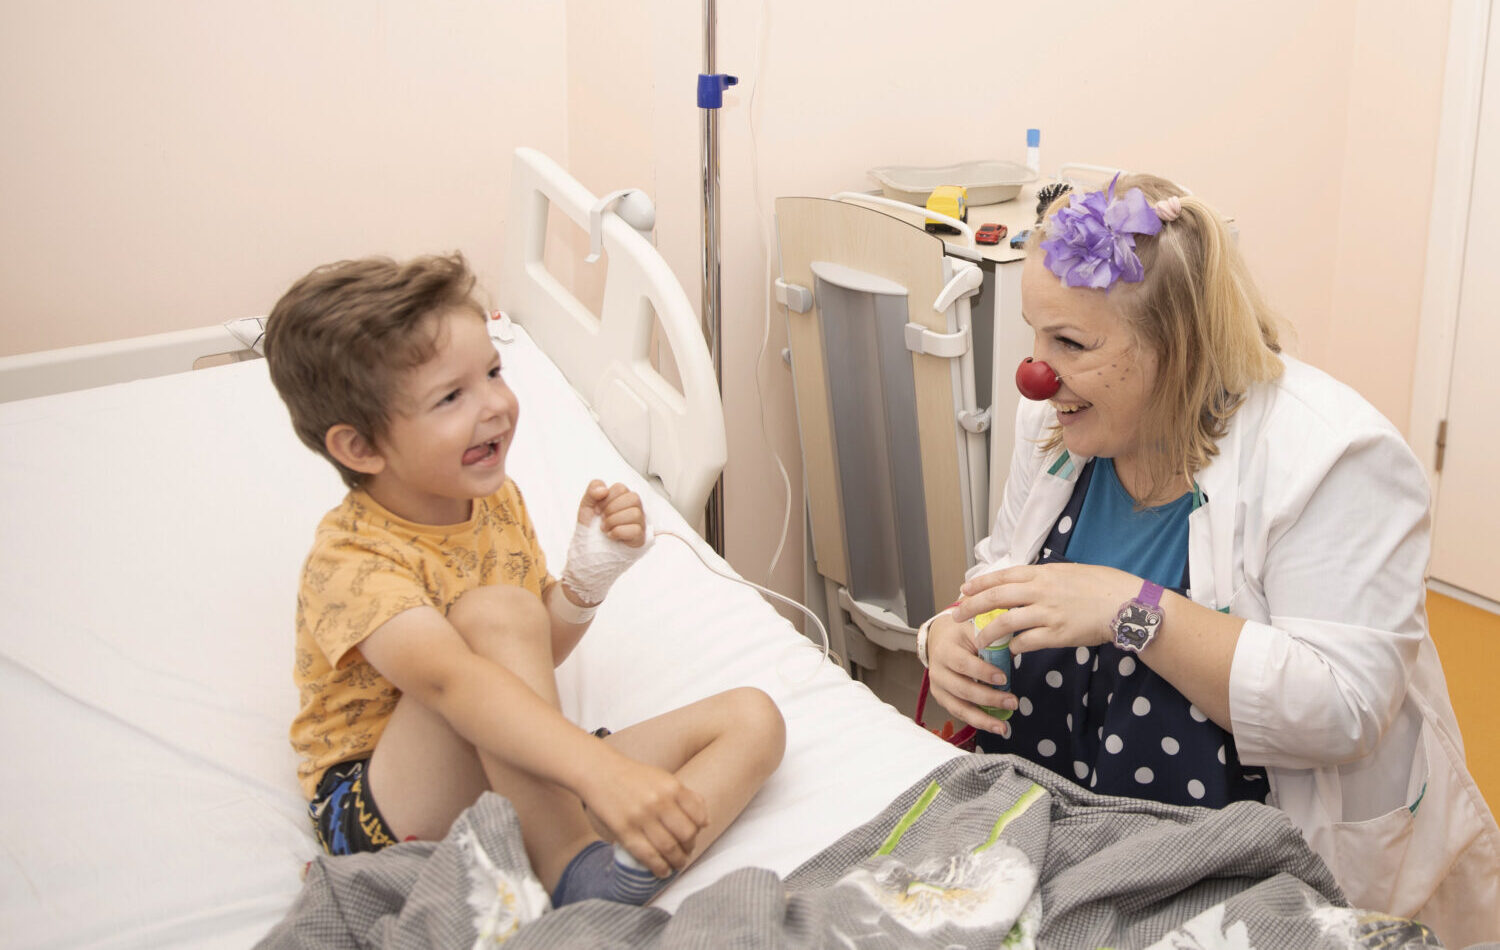 How Humanity Invented Healing with a Smile: The History of Healthcare Clowning